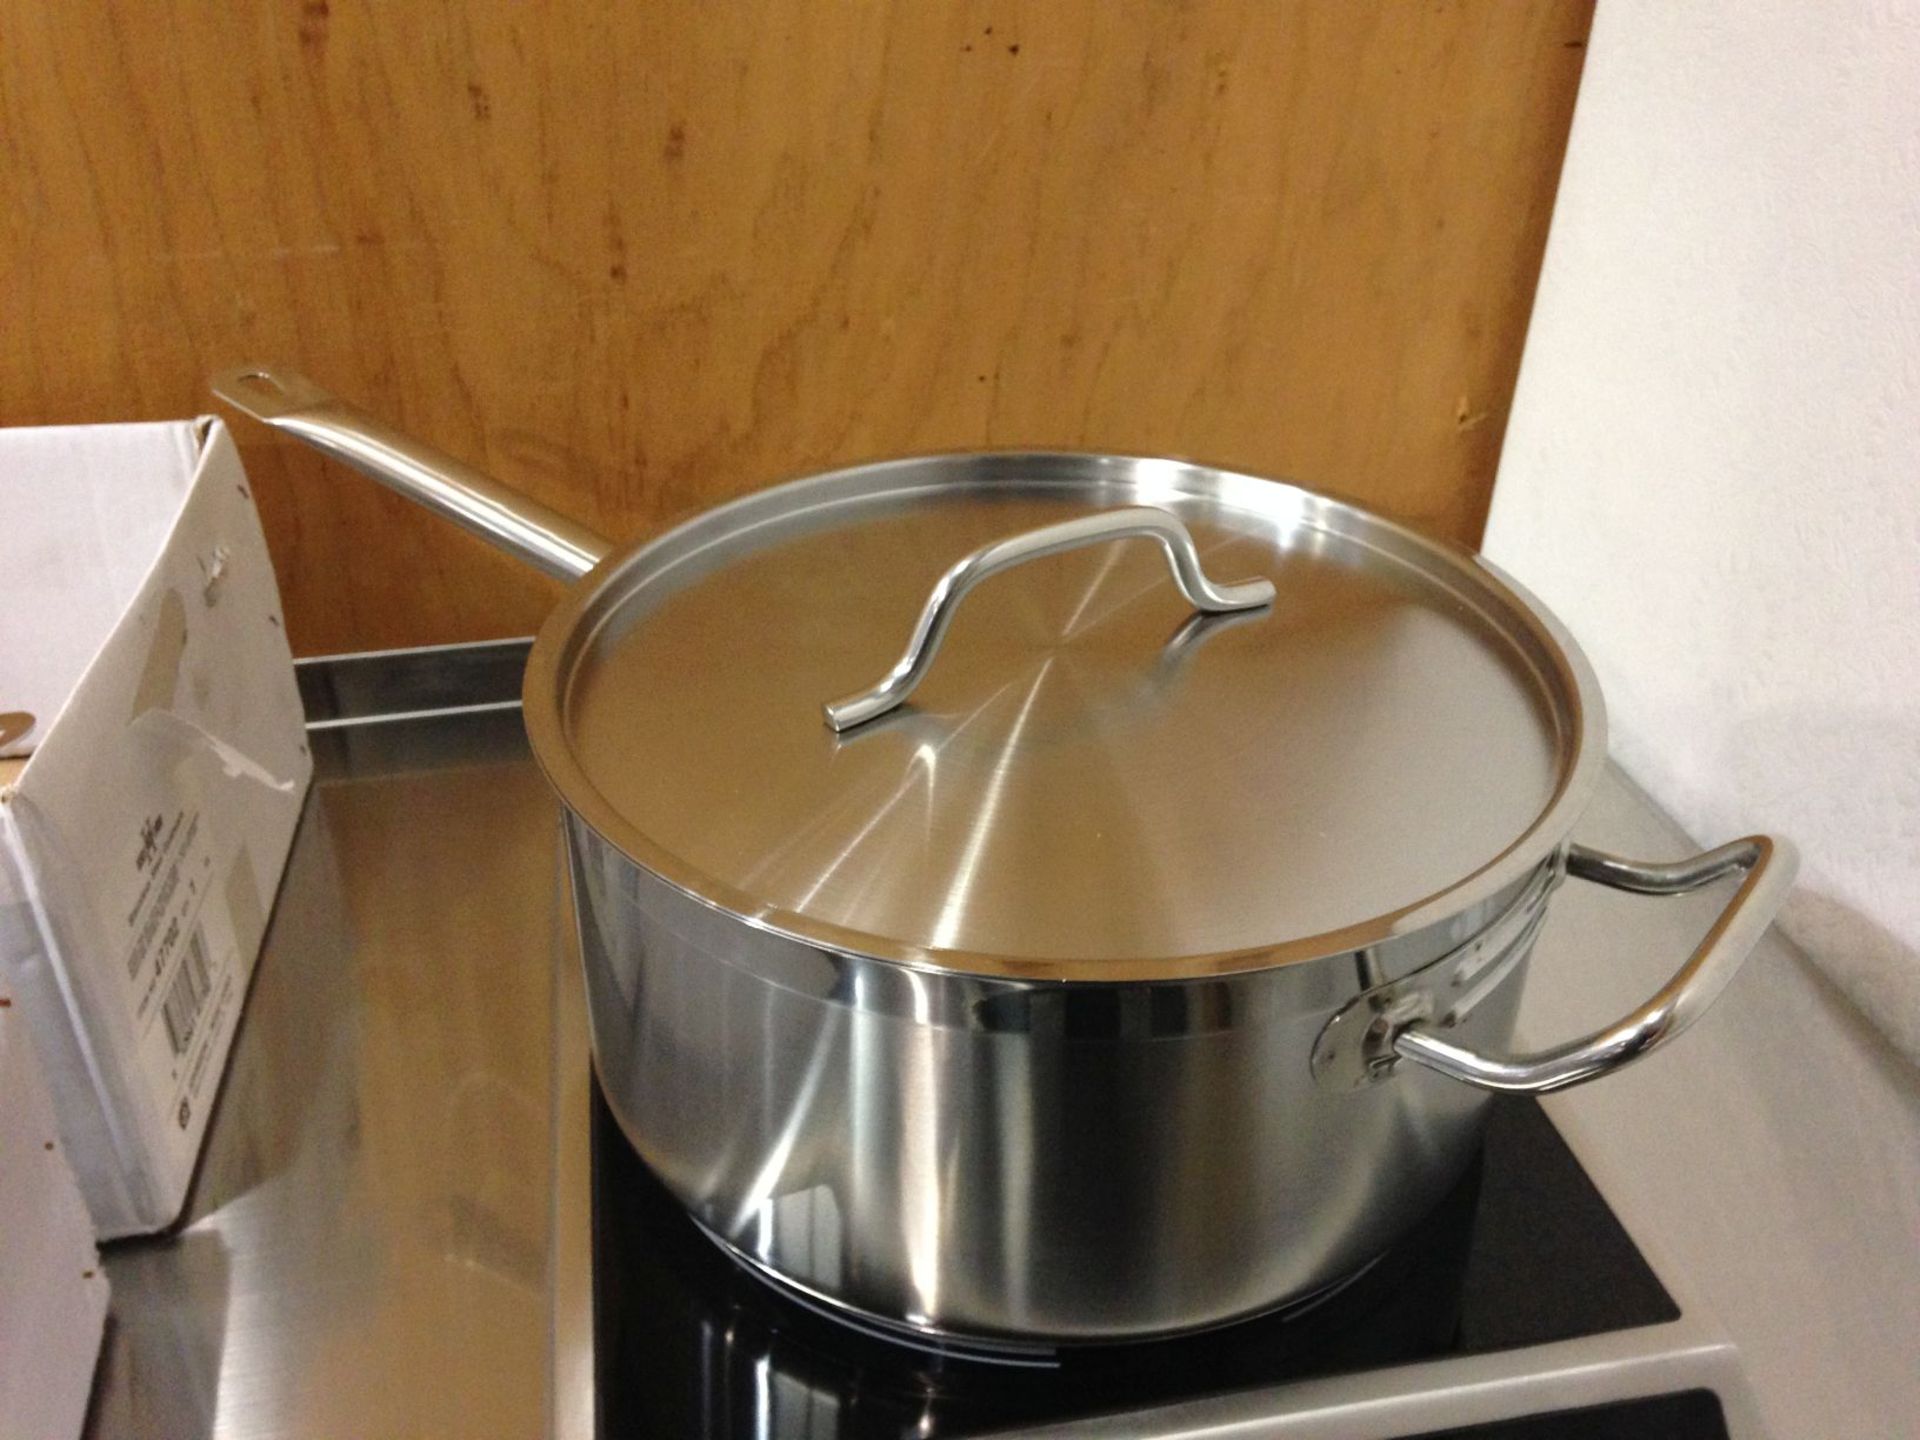 7.5qt Heavy Duty Sauce Pan Induction Capable - Image 4 of 4